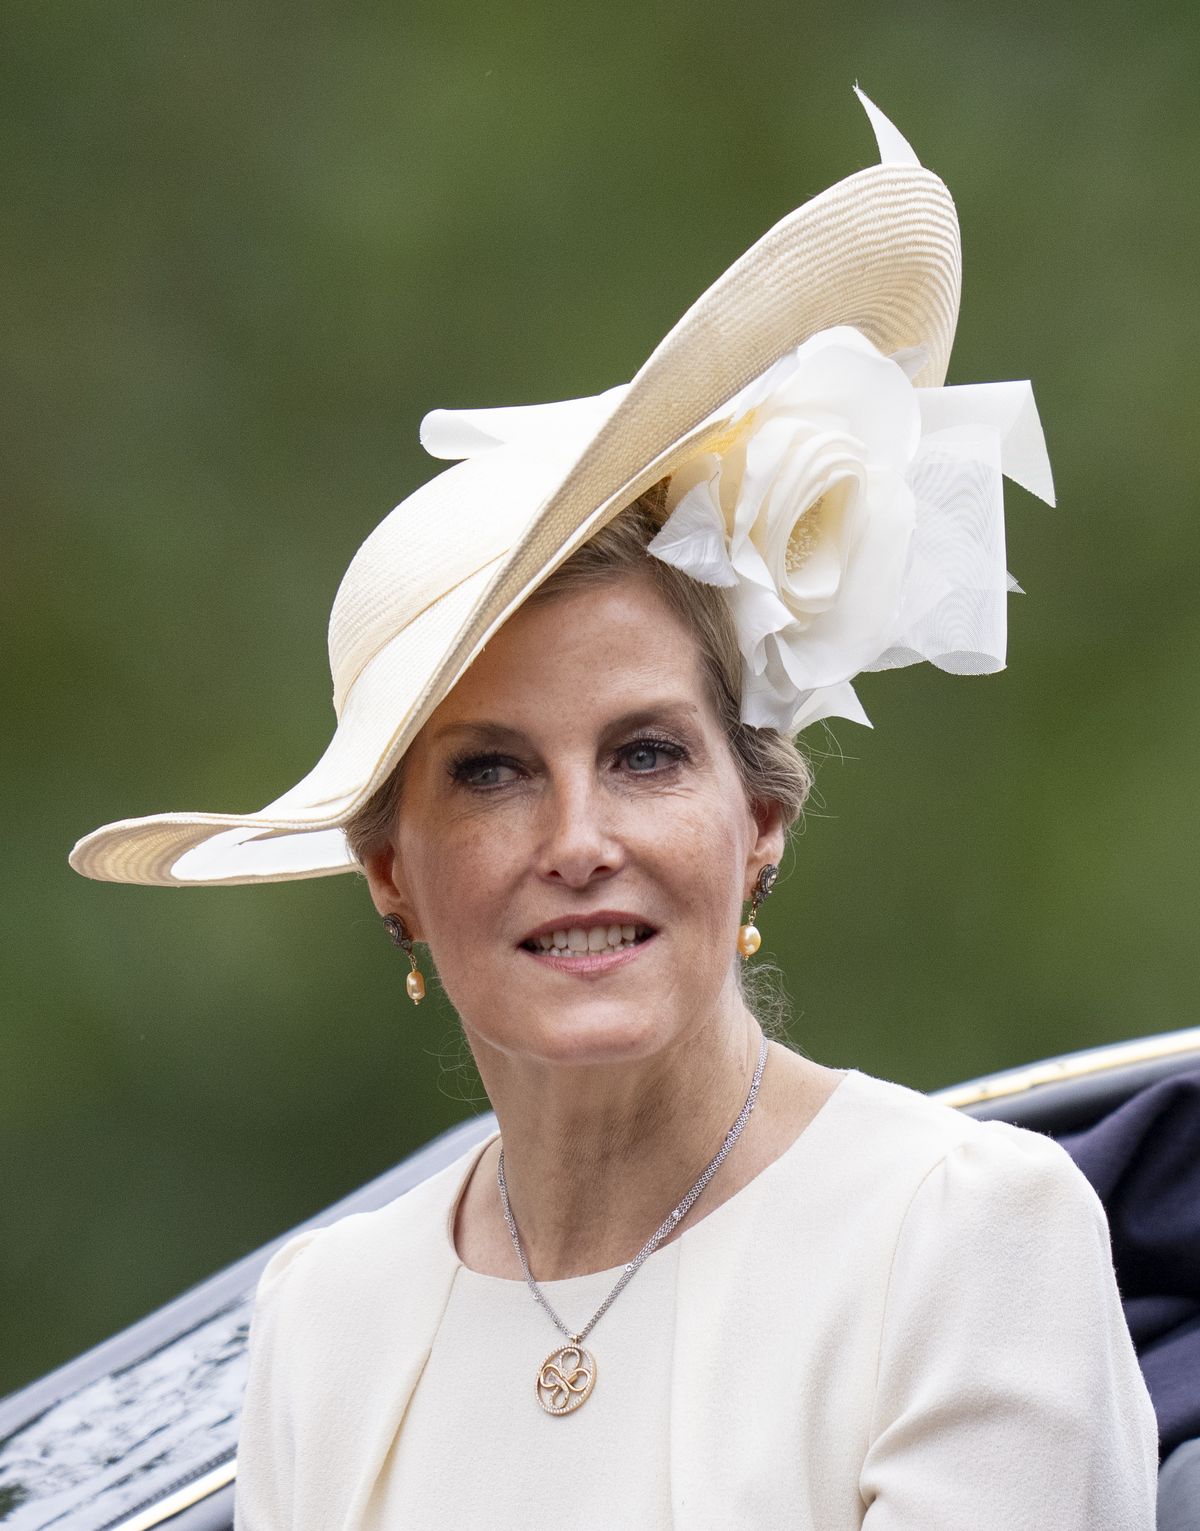 Sophie, Duchess of Edinburgh Wore a Dramatic Floral Hat at Trooping the